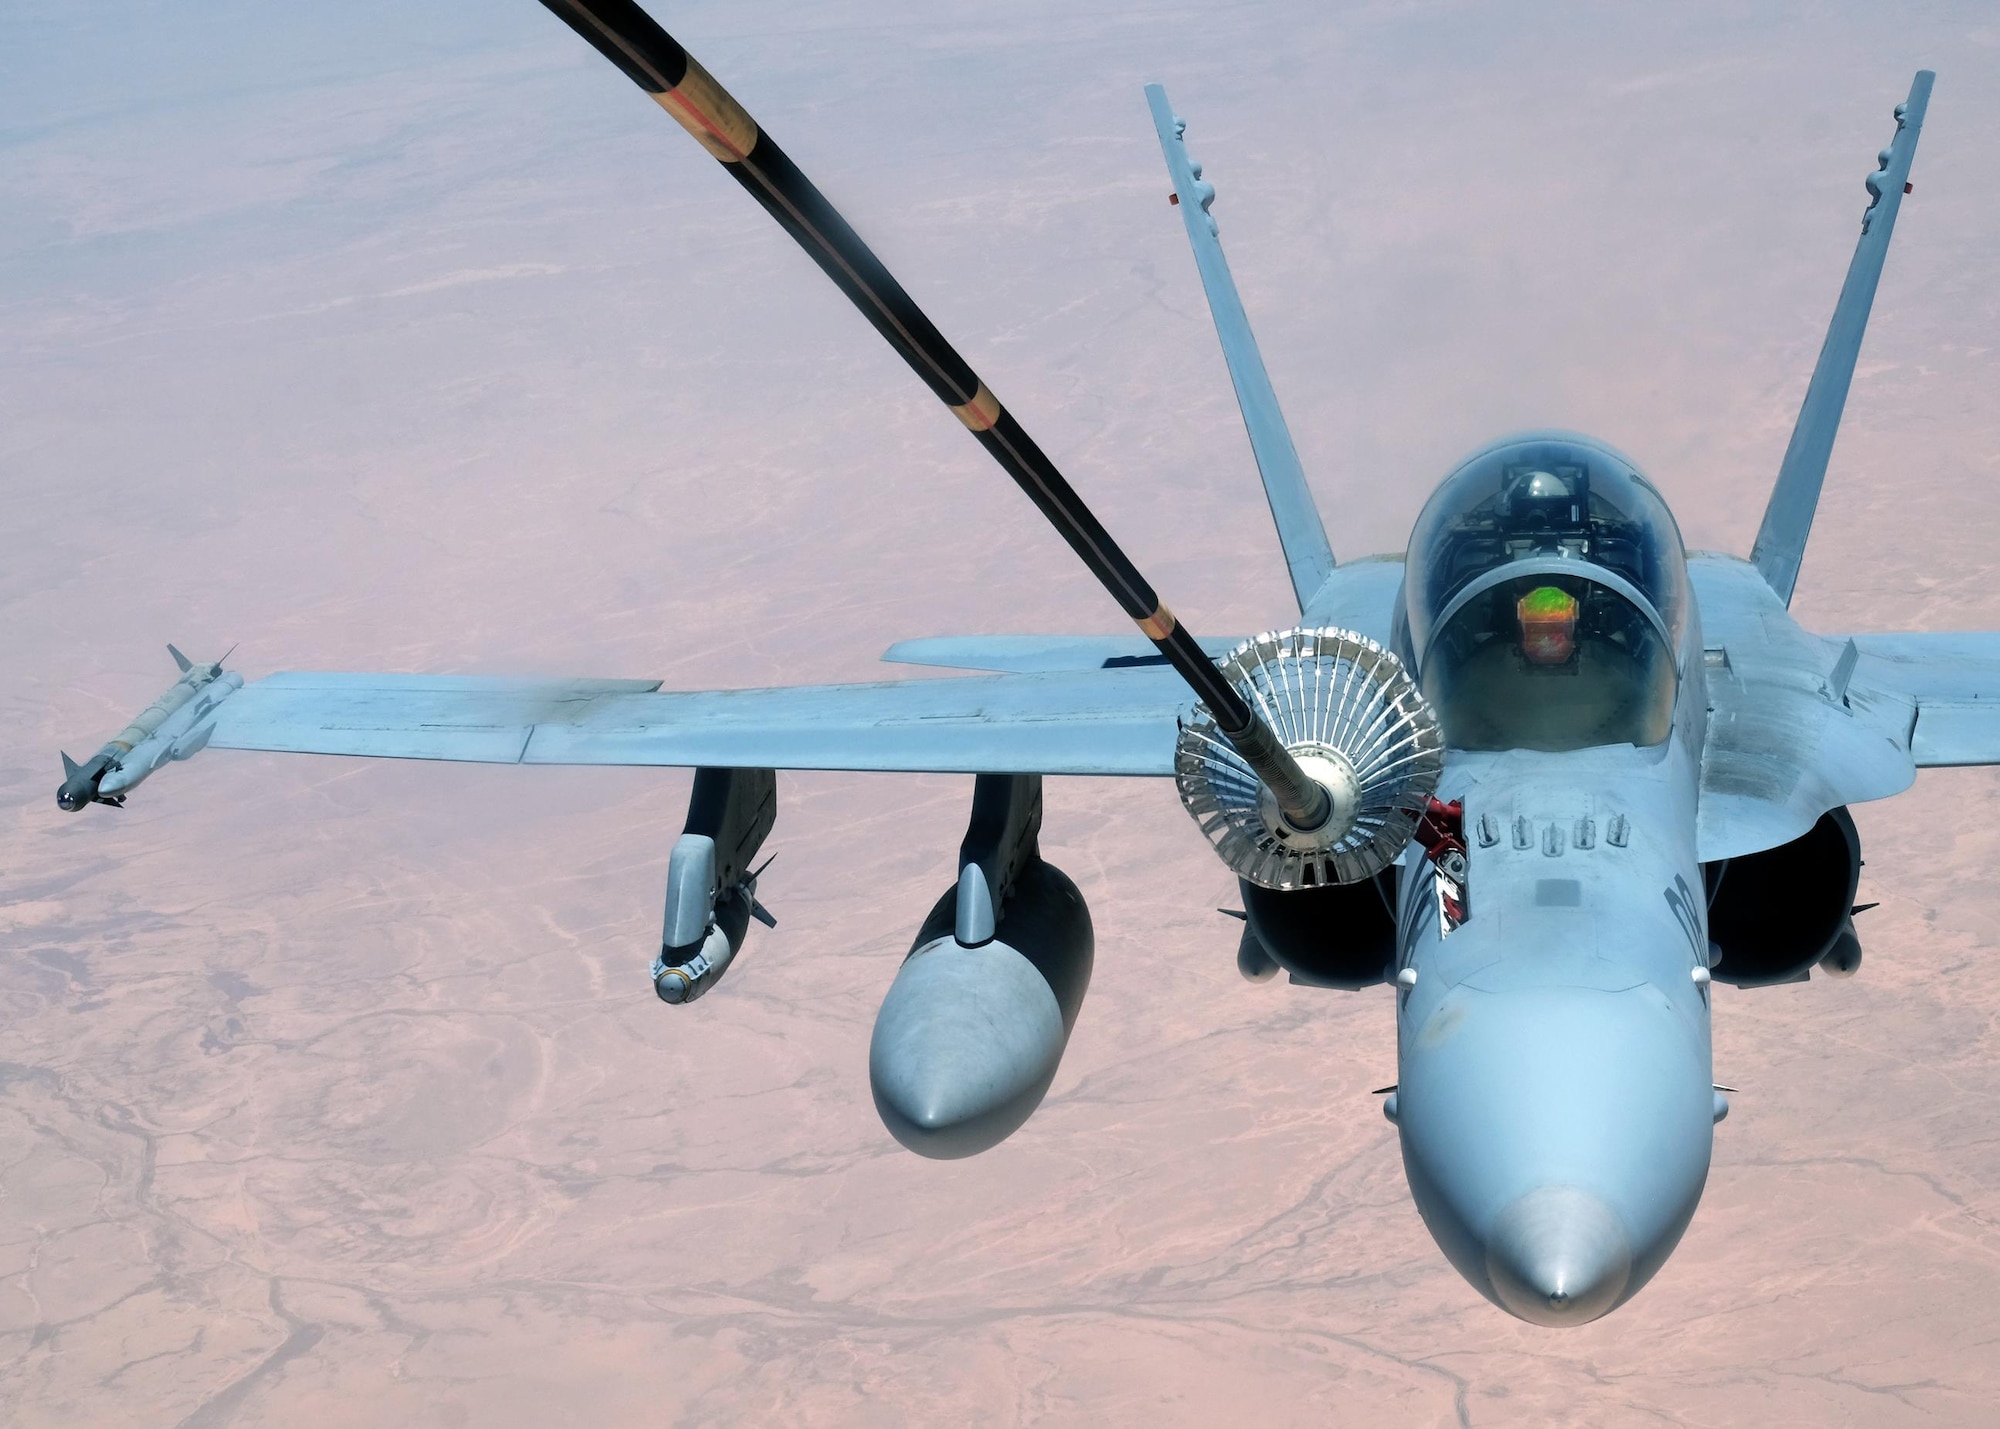 A U.S. Marine F-18 Super Hornet receives fuel from a 908th Expeditionary Air Refueling Squadron KC-10 Extender May 31, 2017, over an undisclosed location in southwest Asia. The Super Hornet is highly capable across the full mission spectrum, enabling air superiority through fighter escort, reconnaissance, close air support, air defense suppression and day or night precision strikes. (U.S. Air Force photo by Senior Airman Preston Webb)